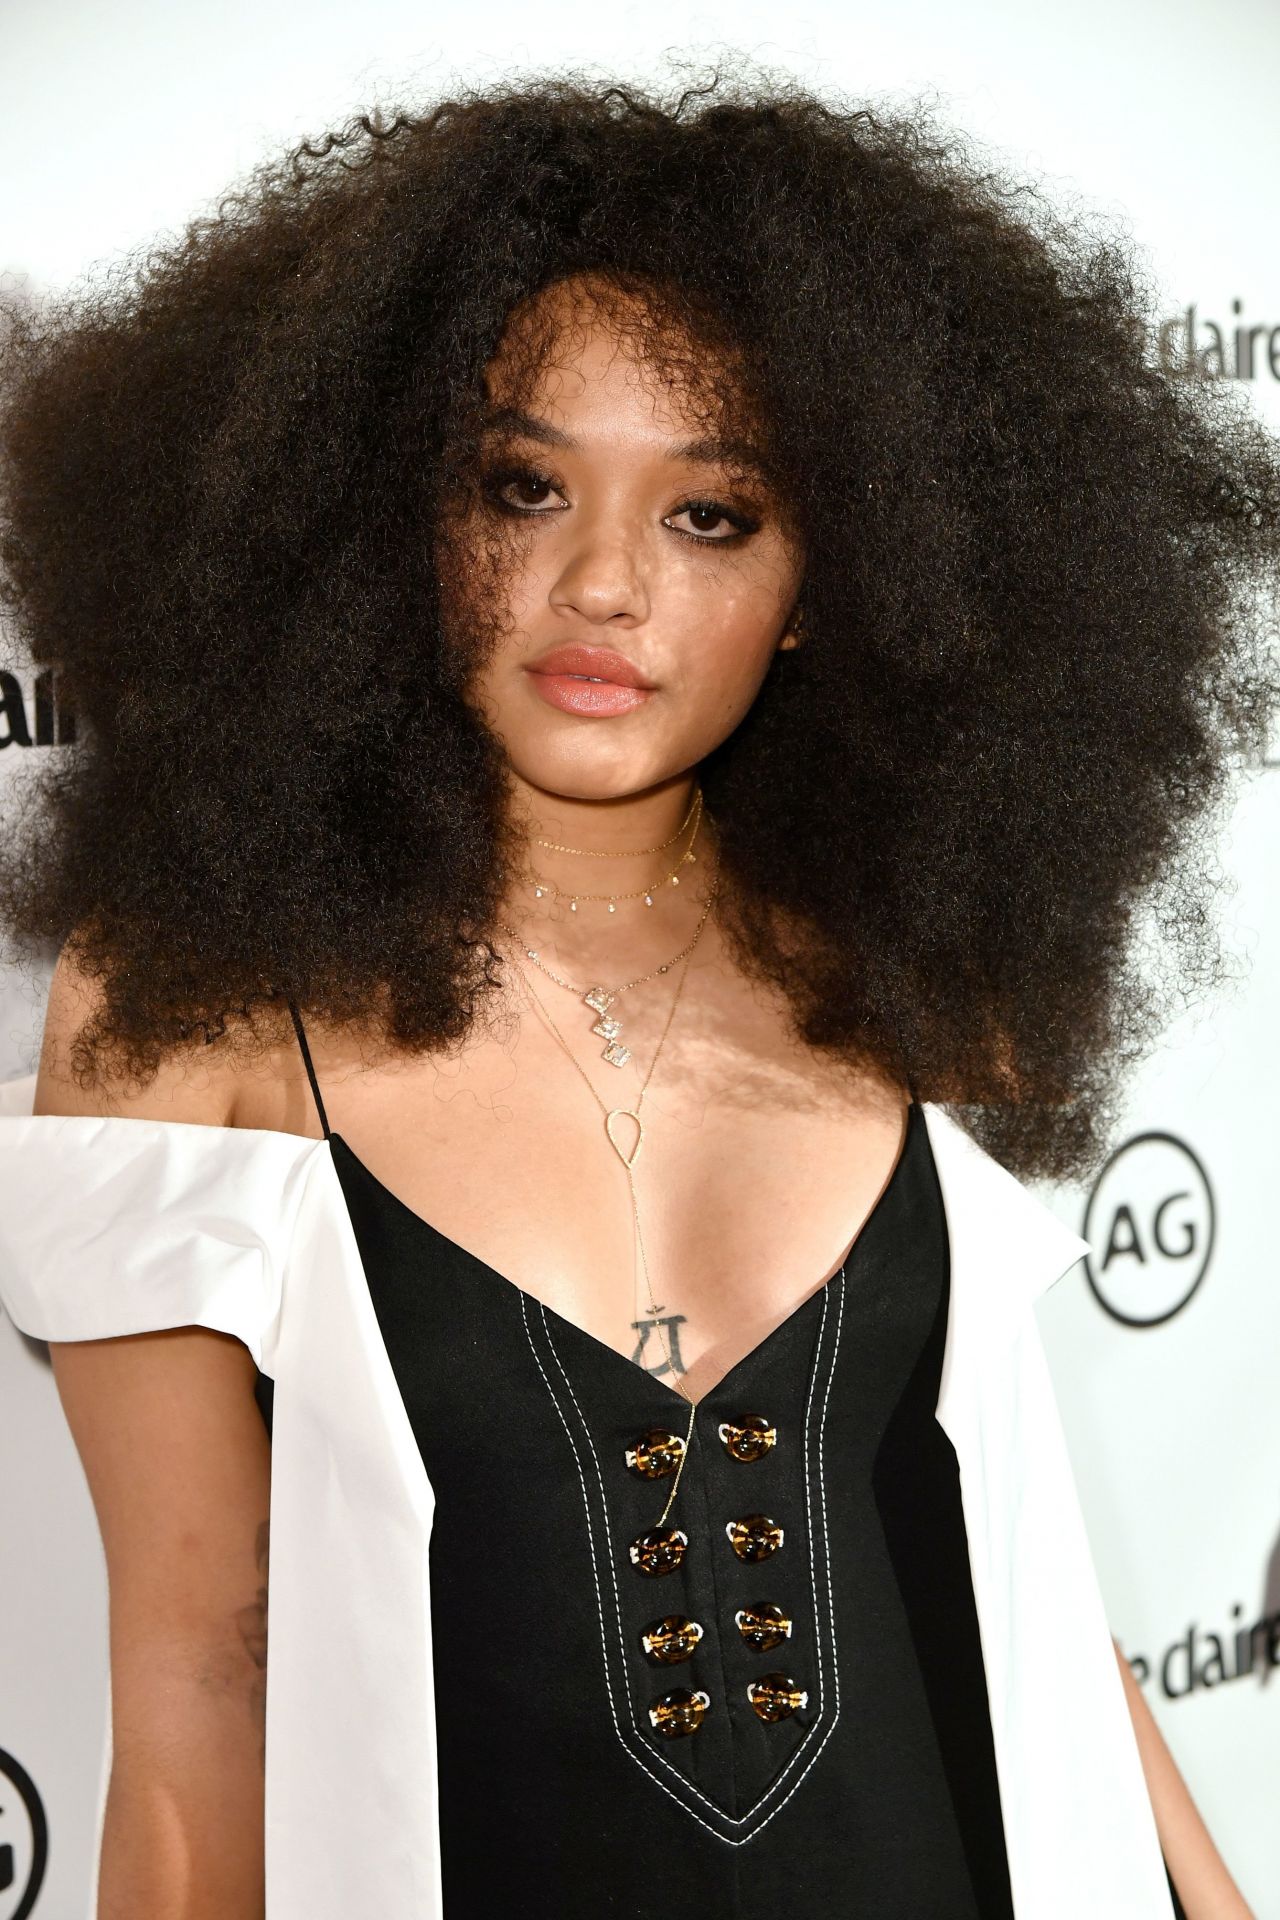 Kiersey Clemons Style, Clothes, Outfits and Fashion• Page 3 of 3 ...